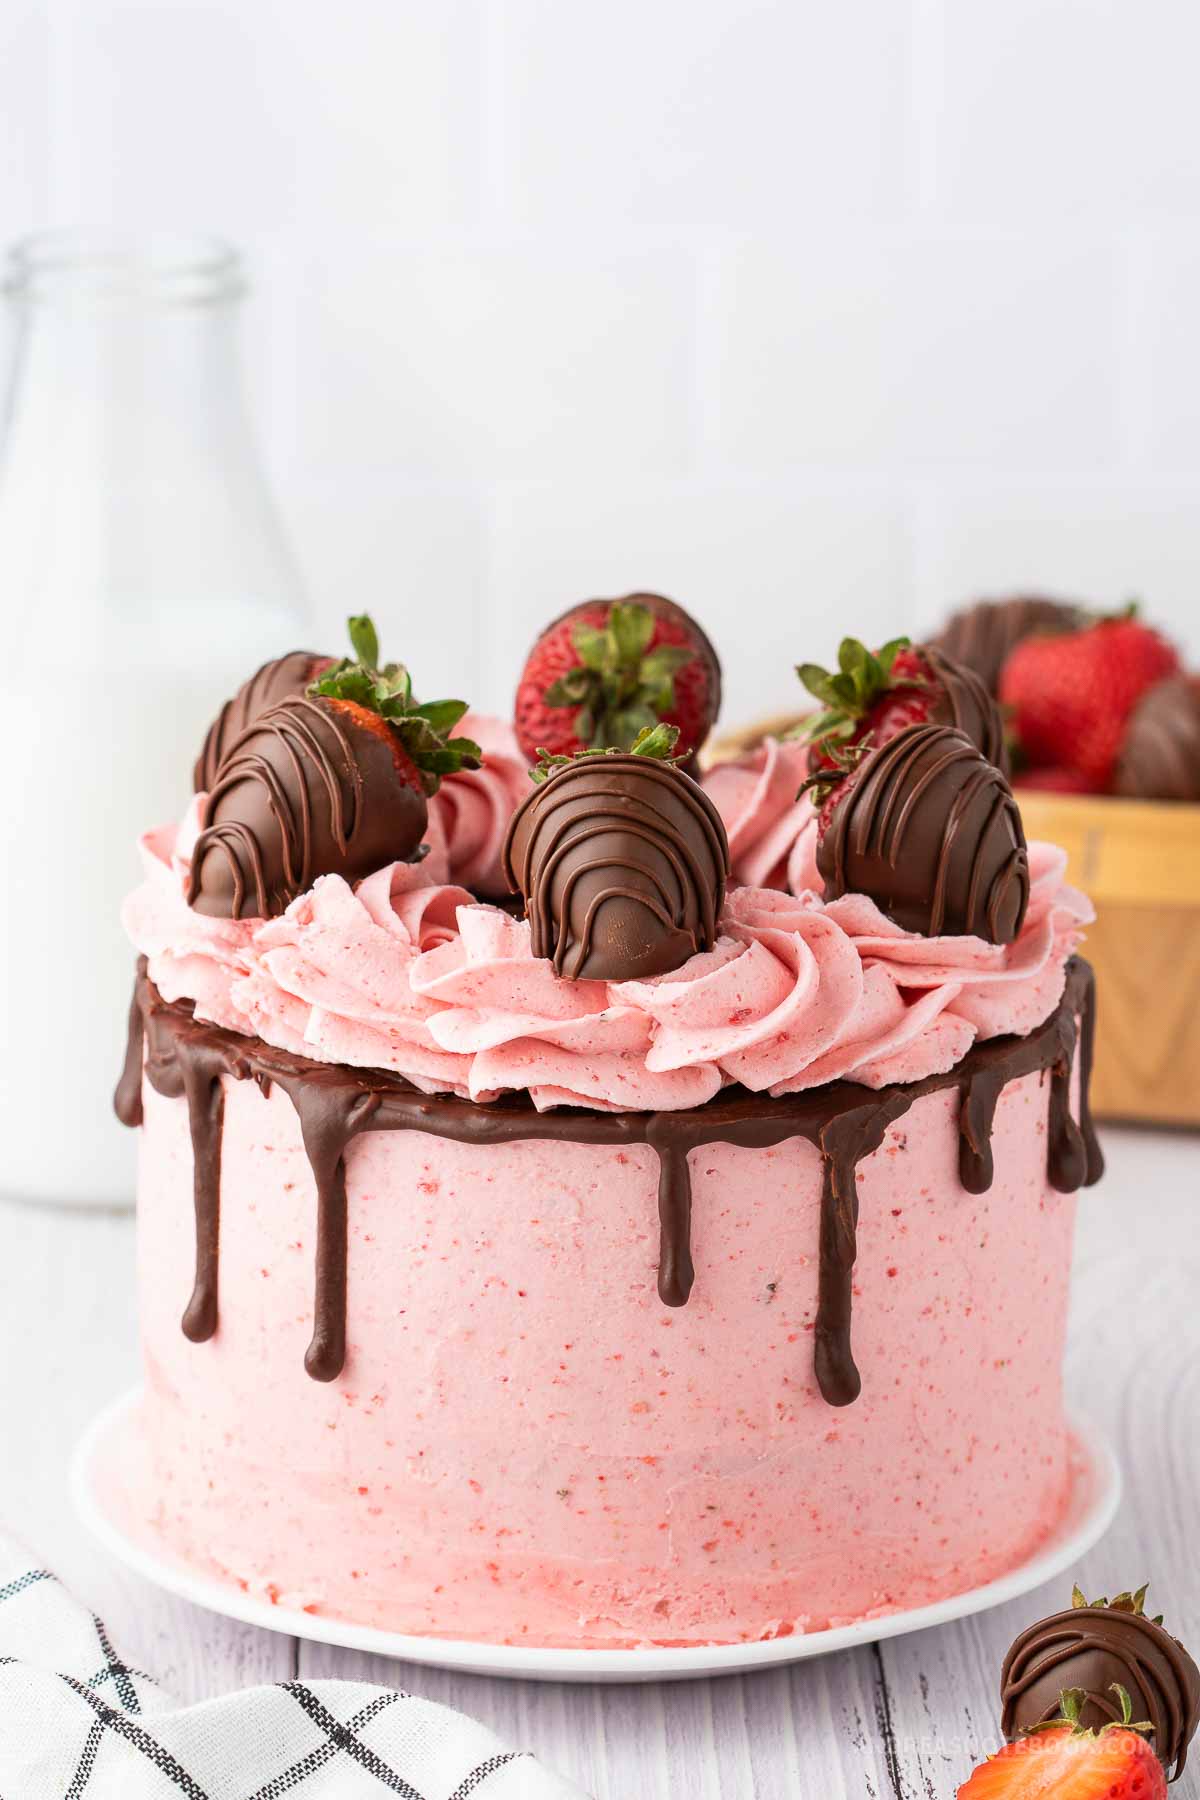 Strawberry chocolate cake with chocolate covered strawberries on top.